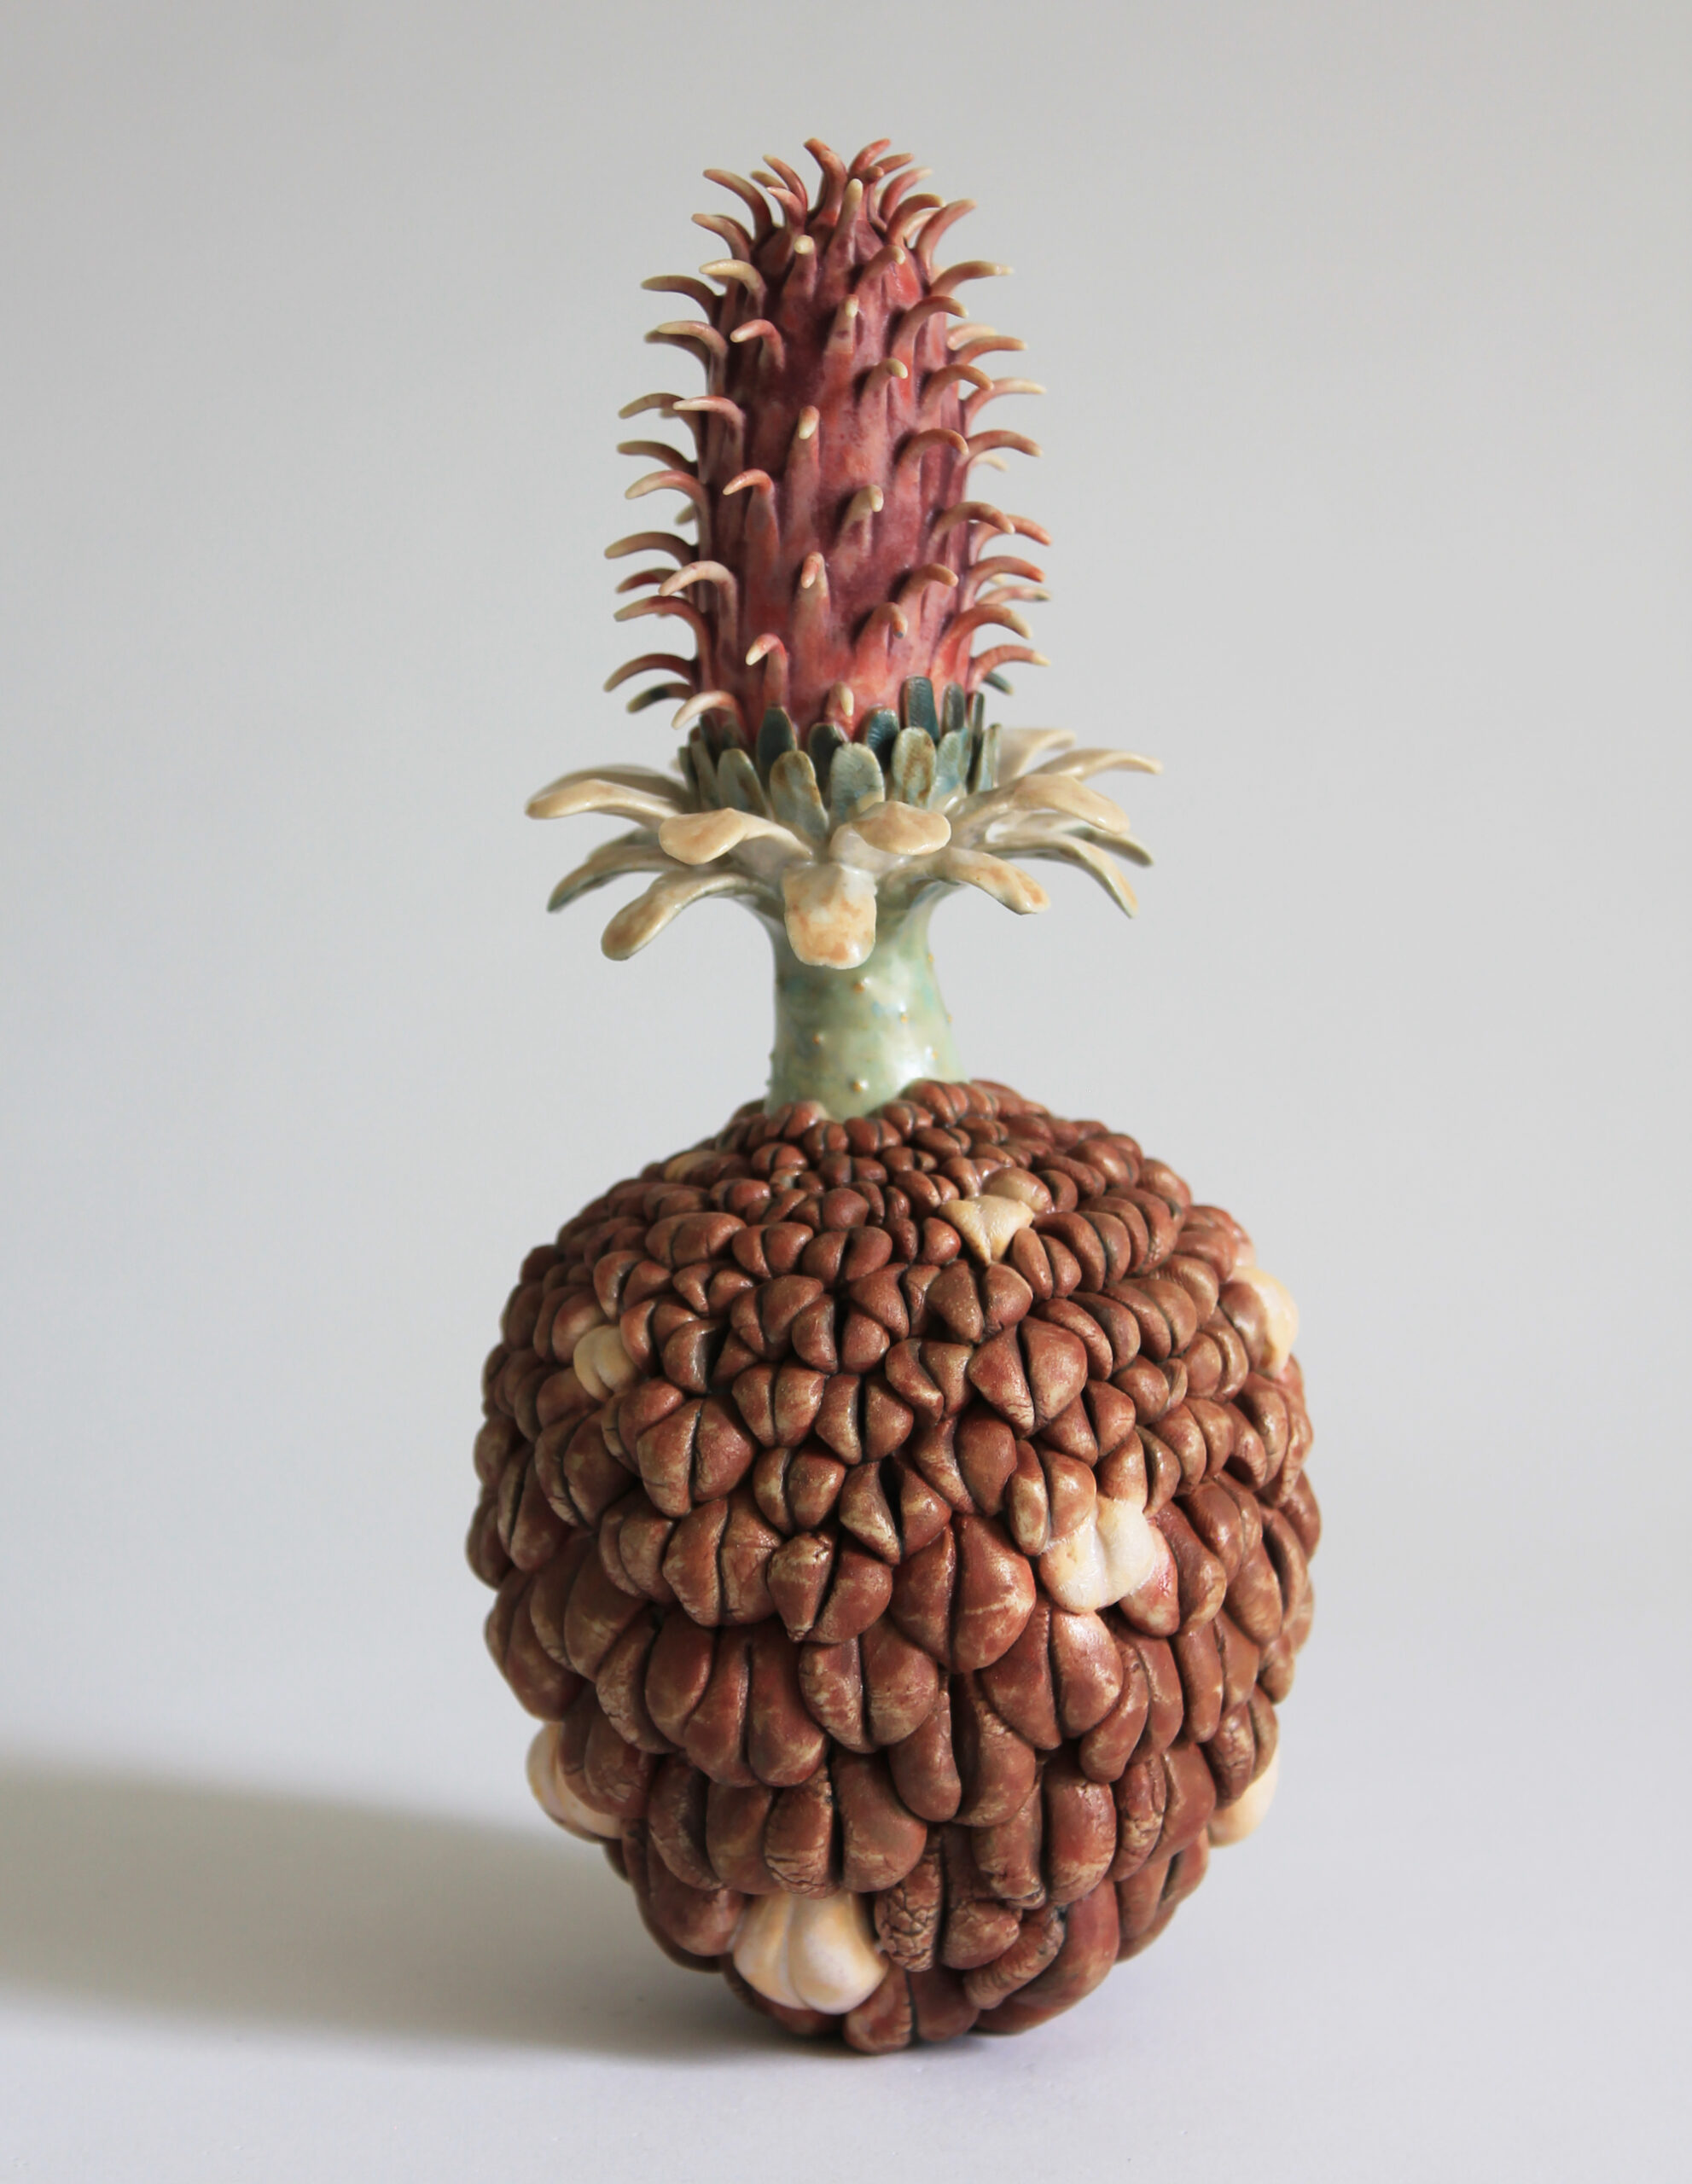 An abstract sculpture of an imaginary plant made from ceramic.